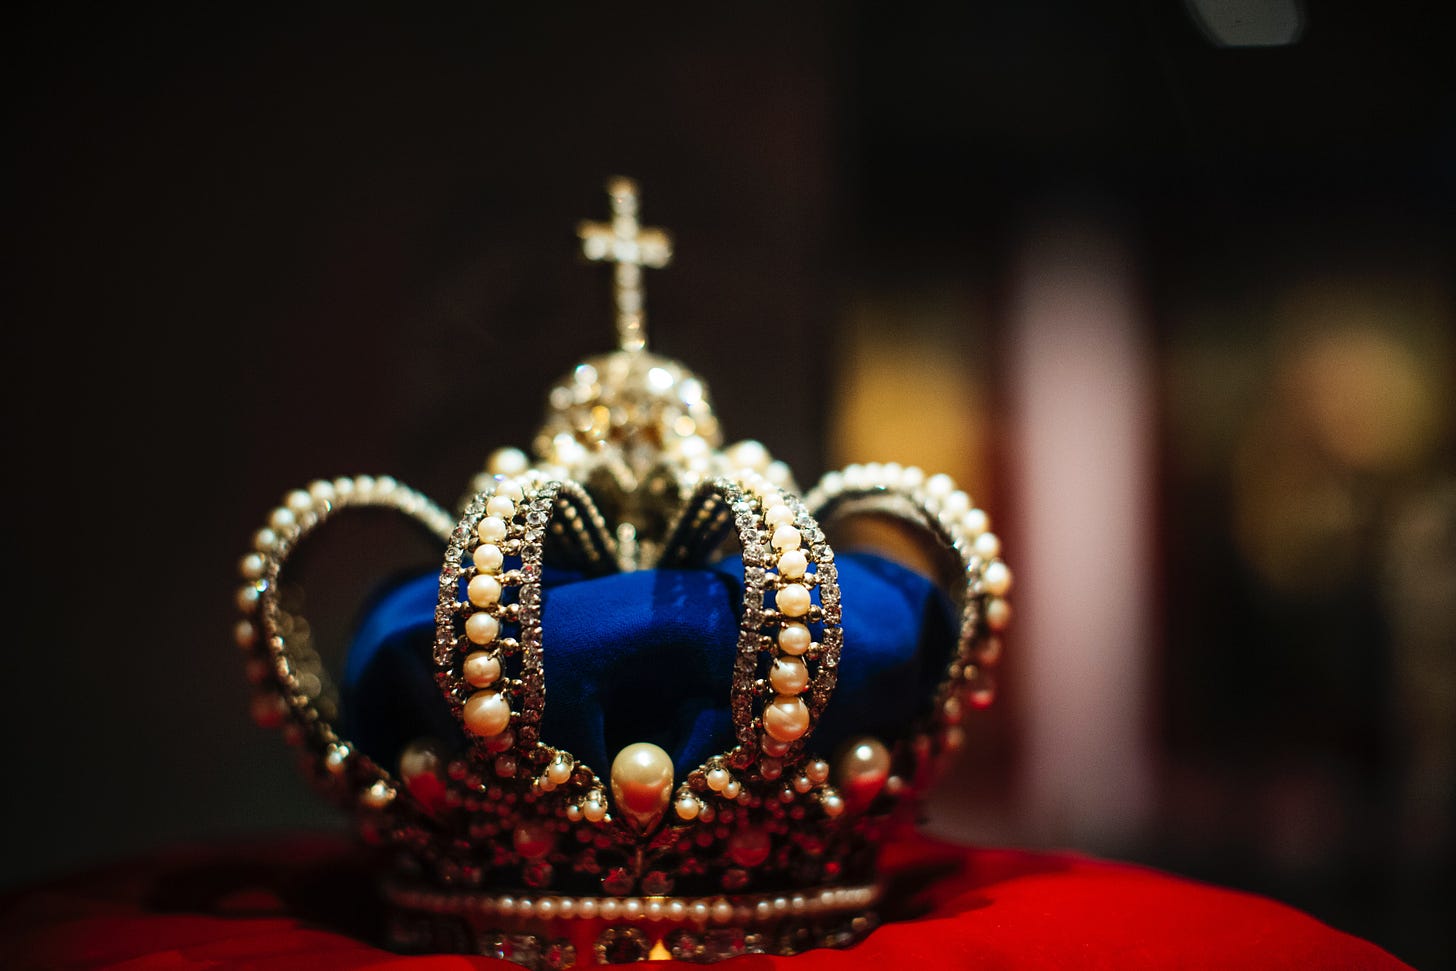 A gold crown with blue sits on a red velvet pillow